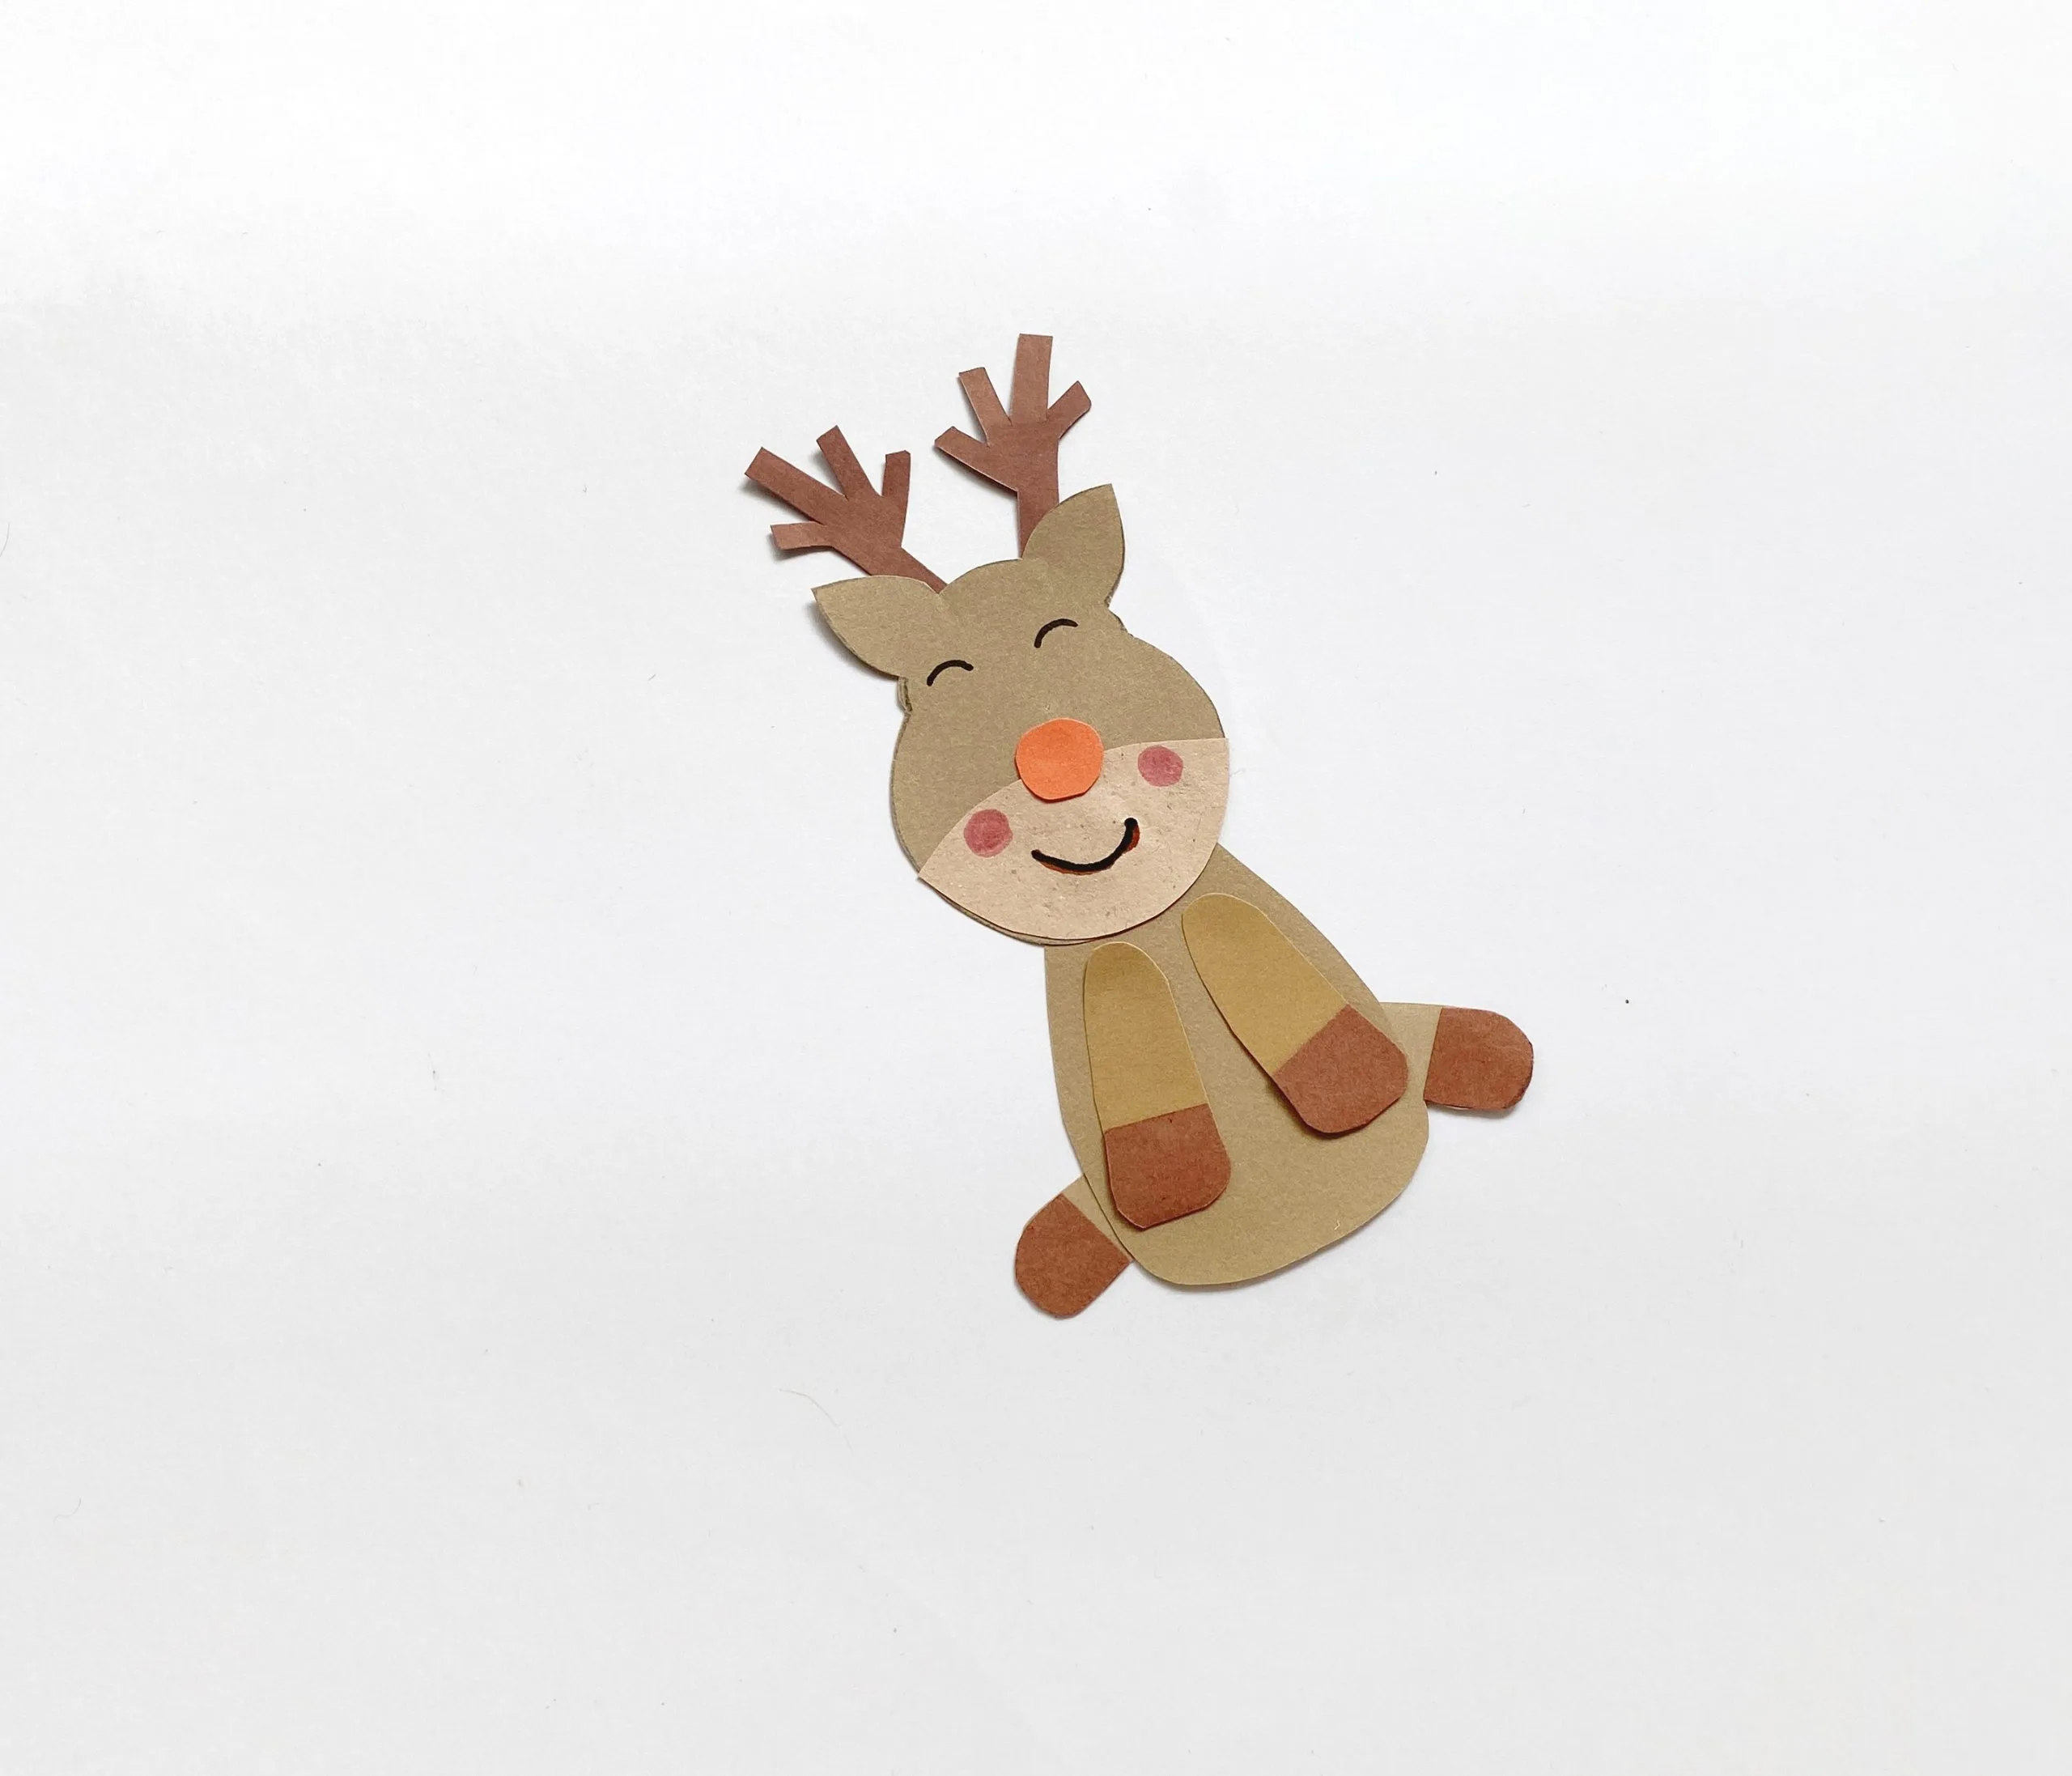 how to make a reindeer pop up card step by step